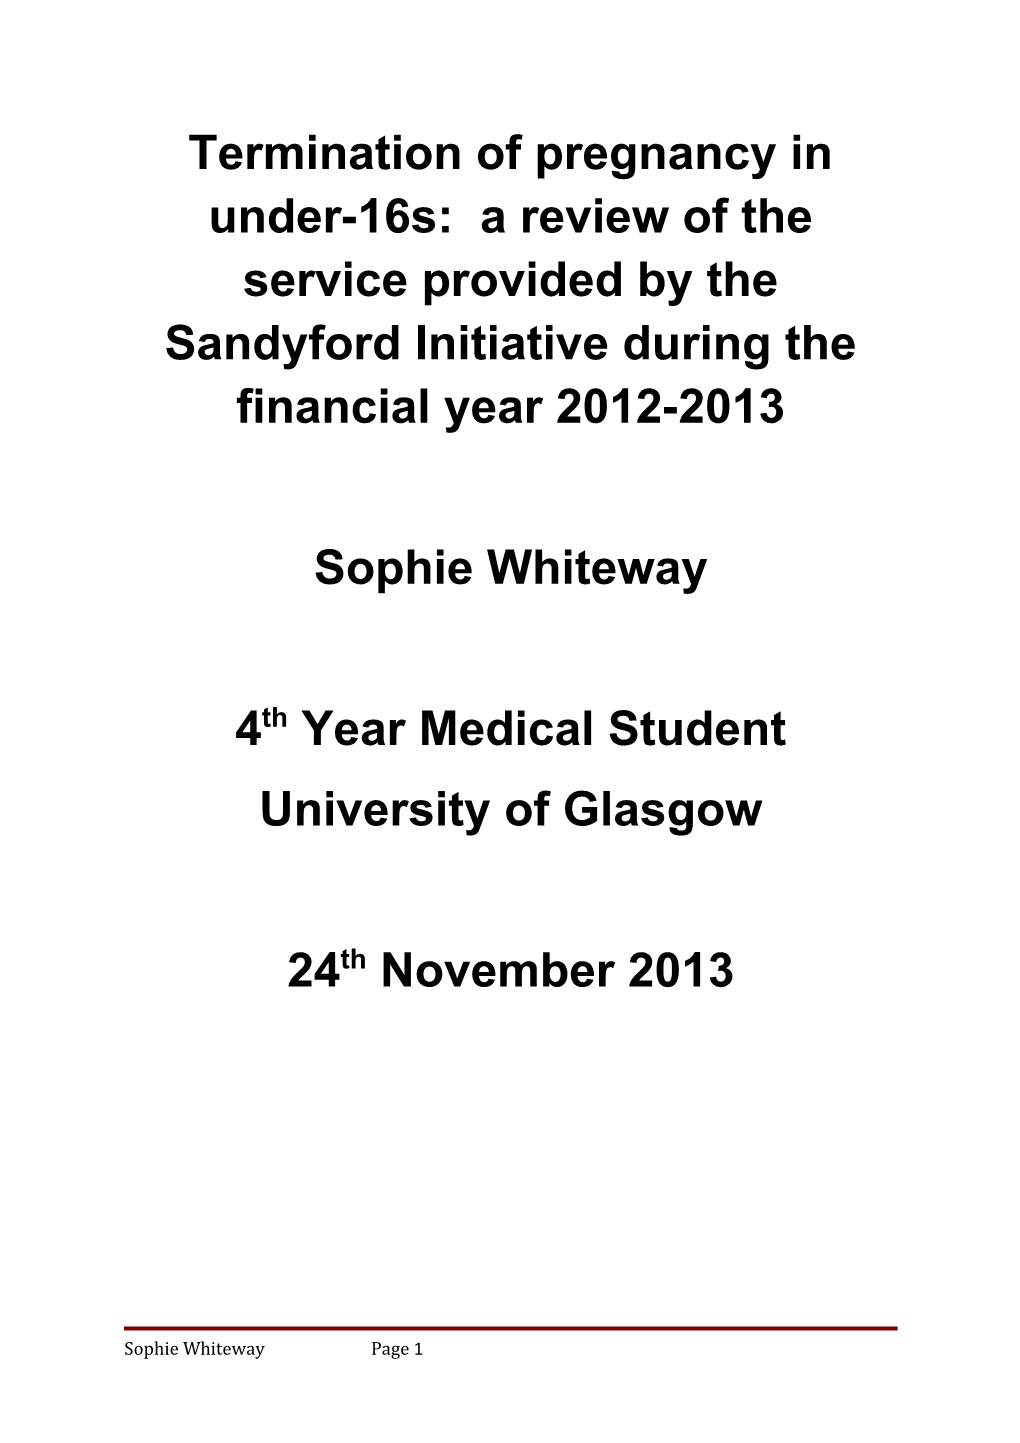 Termination of Pregnancy in Under-16S: a Review of the Service Provided by the Sandyford